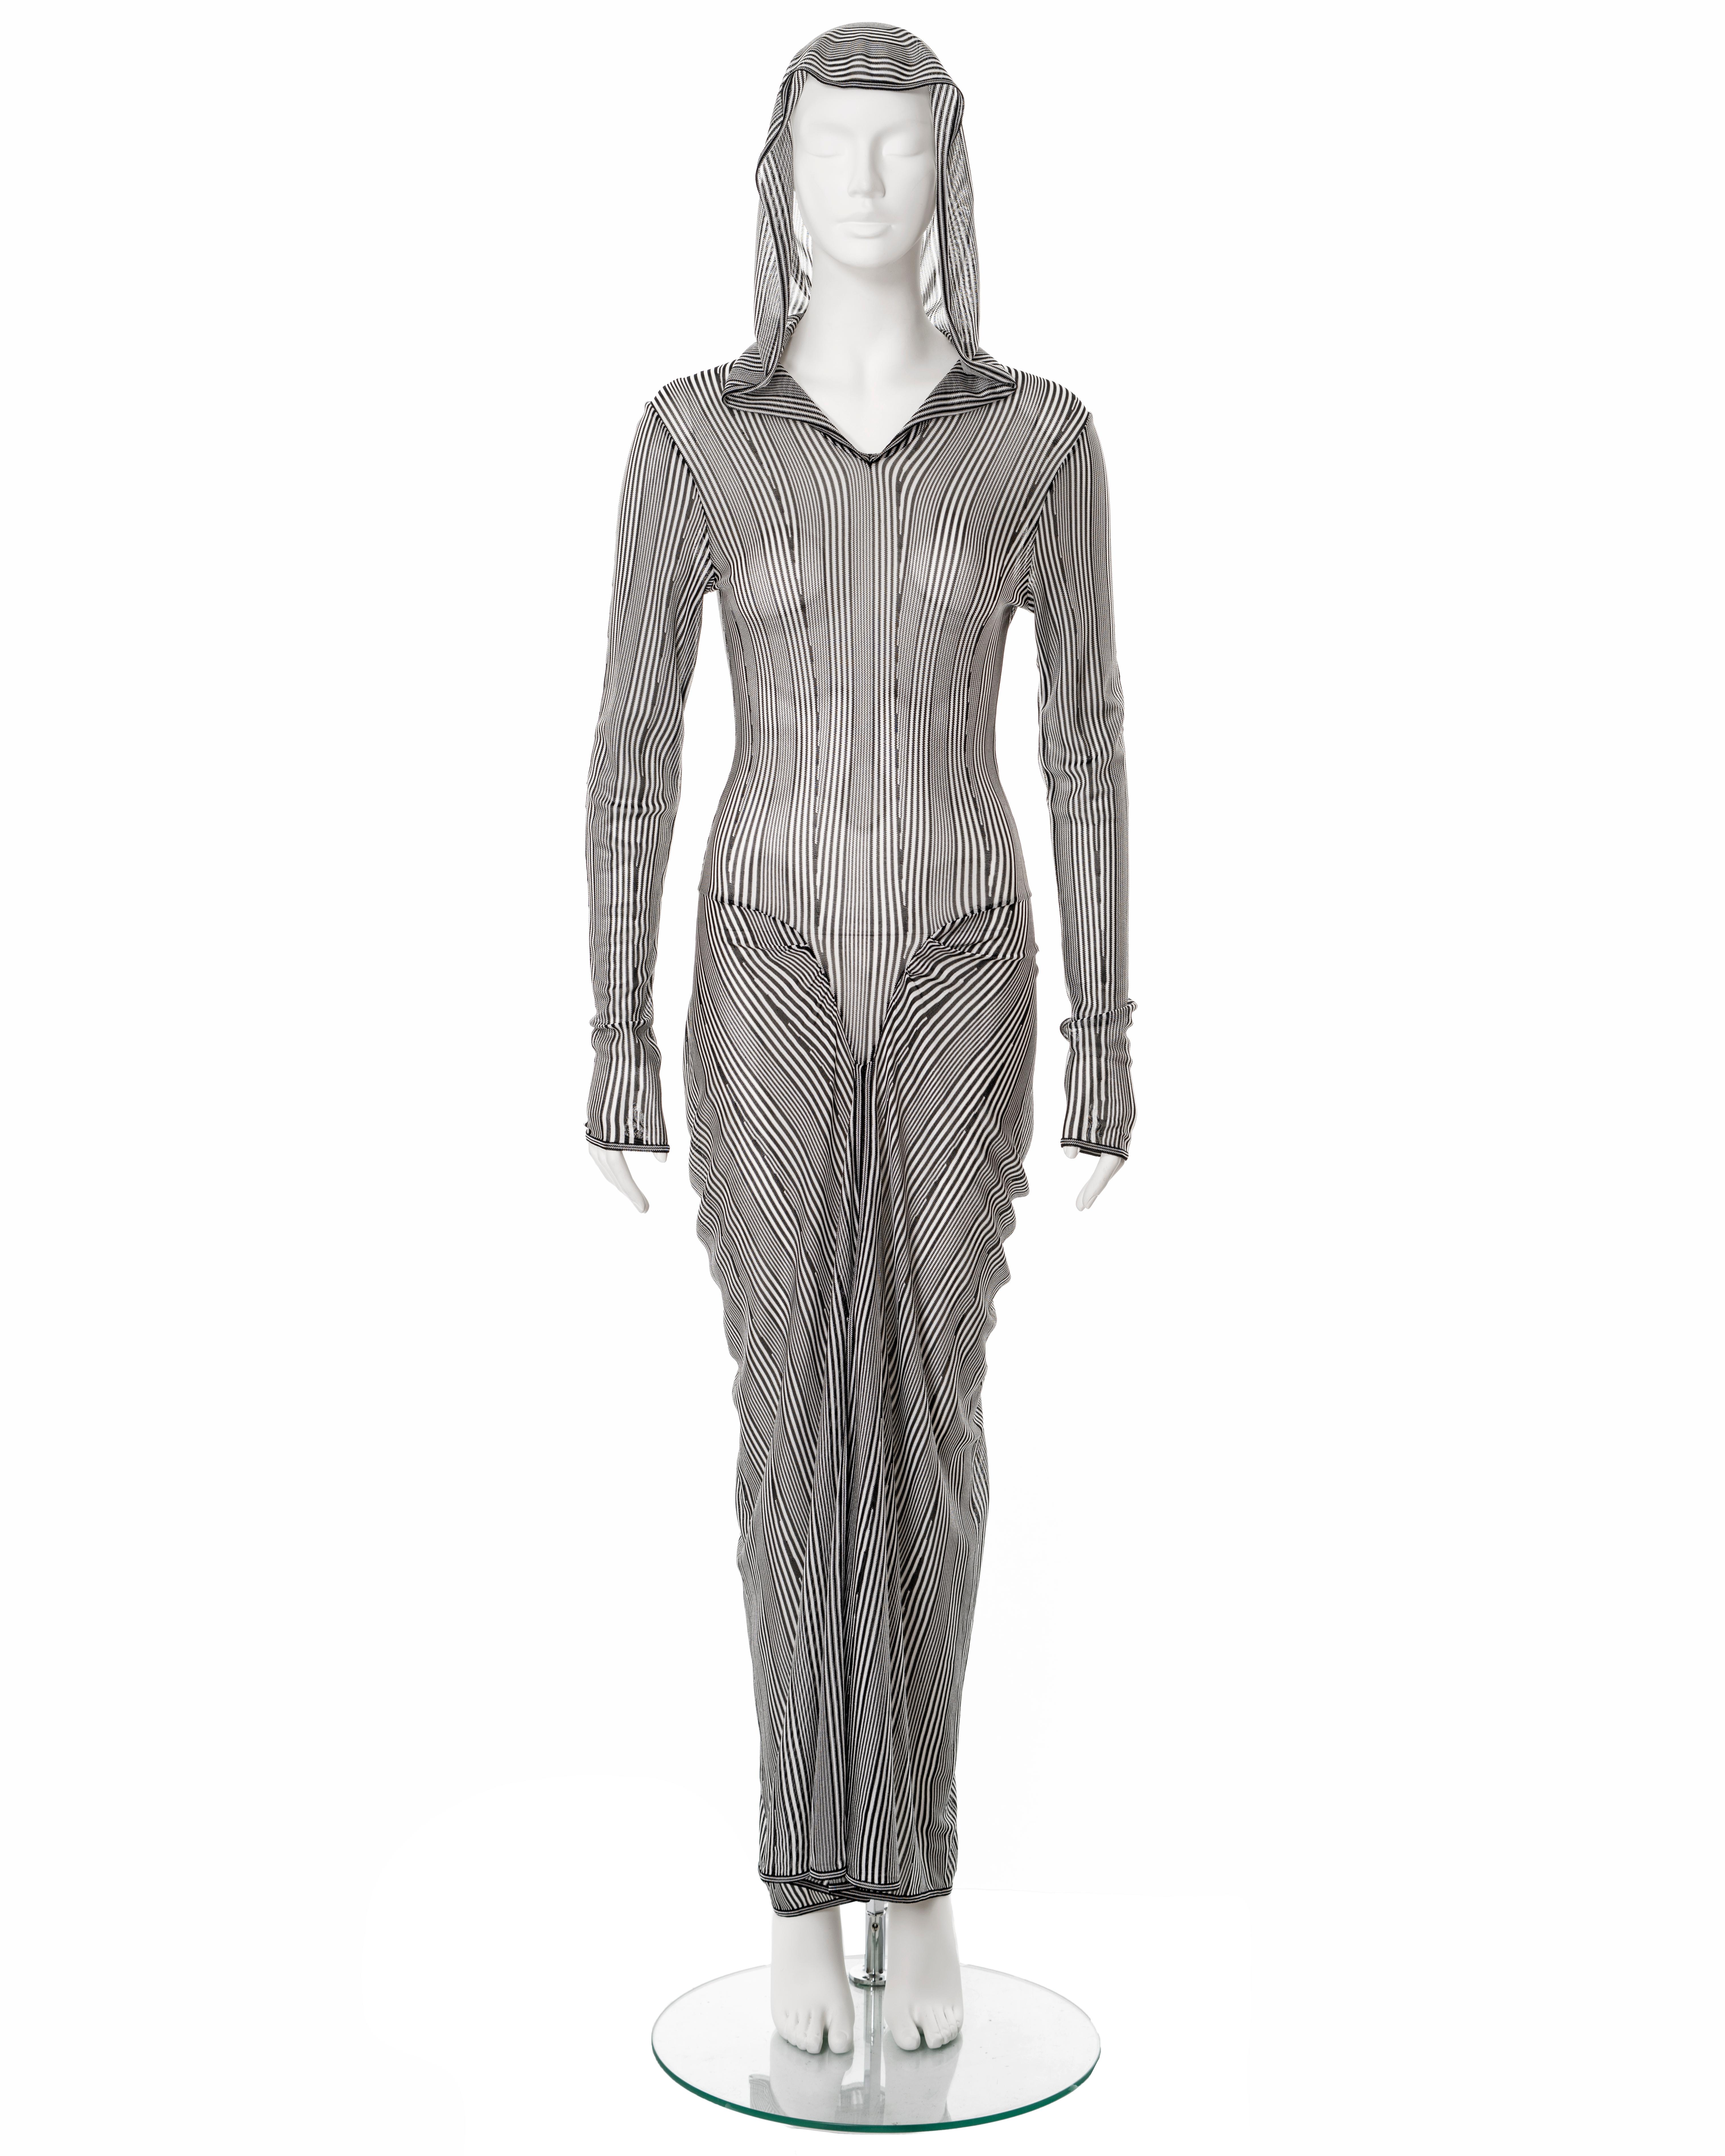 ▪ John Galliano hooded summer dress
▪ Sold by One of a Kind Archive
▪ Spring-Summer 2002
▪ Constructed from black and white striped viscose knit 
▪ Long fitted sleeves
▪ V-seams at the hips
▪ Draped maxi skirt
▪ Built-in mesh bodysuit 
▪ Size